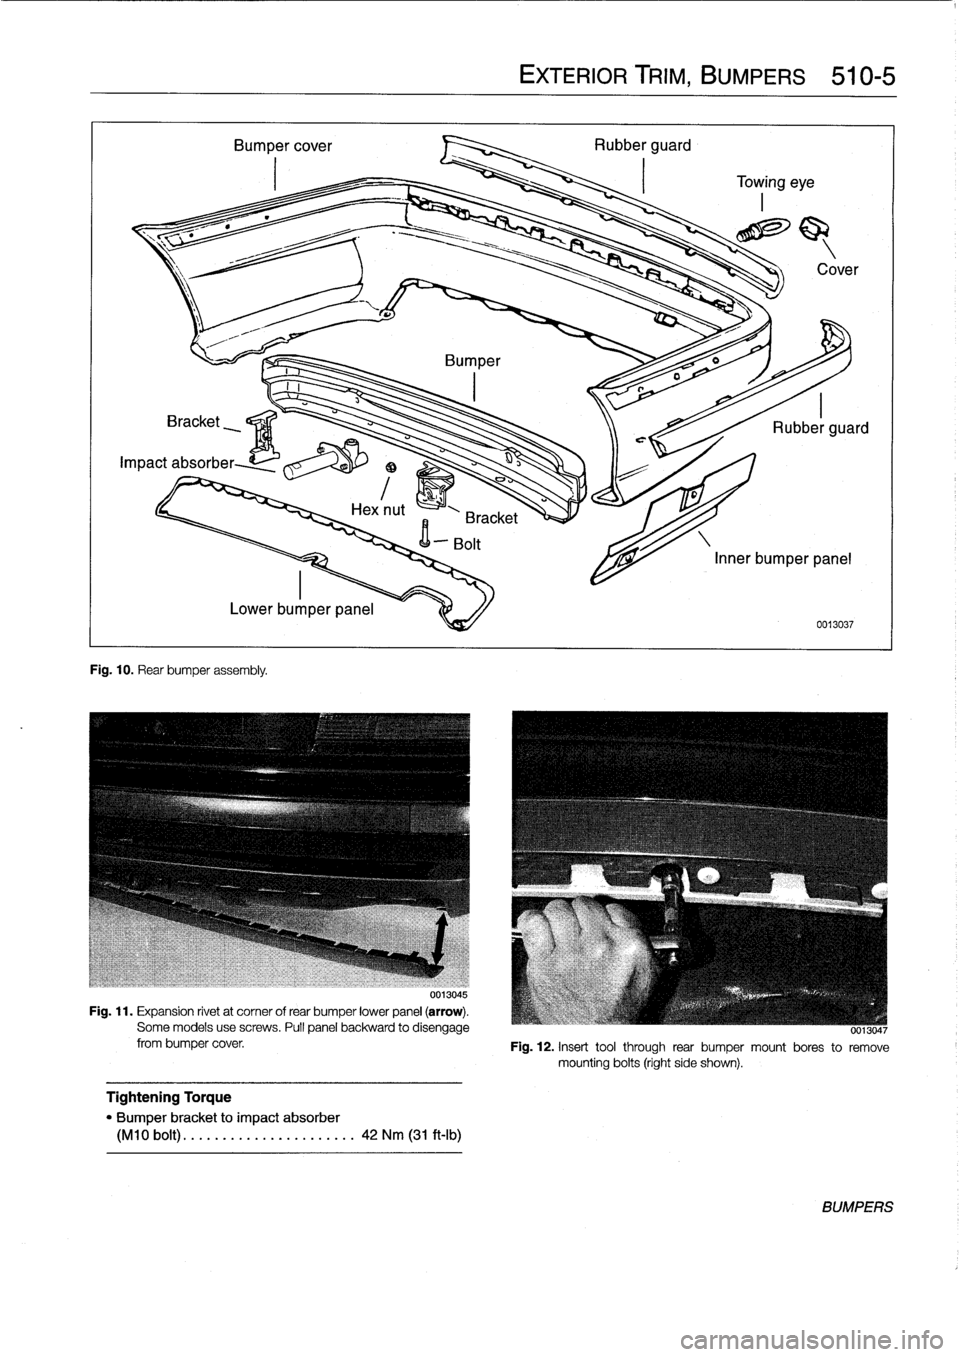 BMW 323i 1997 E36 Service Manual 
Fig
.
10
.
Rear
bumper
assembly
.

0013045

Fig
.
11
.
Expansion
rivet
at
corner
of
rear
bumper
lower
panel
(arrow)
.
Some
models
usescrews
.
Pull
panel
backward
to
disengage
from
bumper
cover
.

Tig